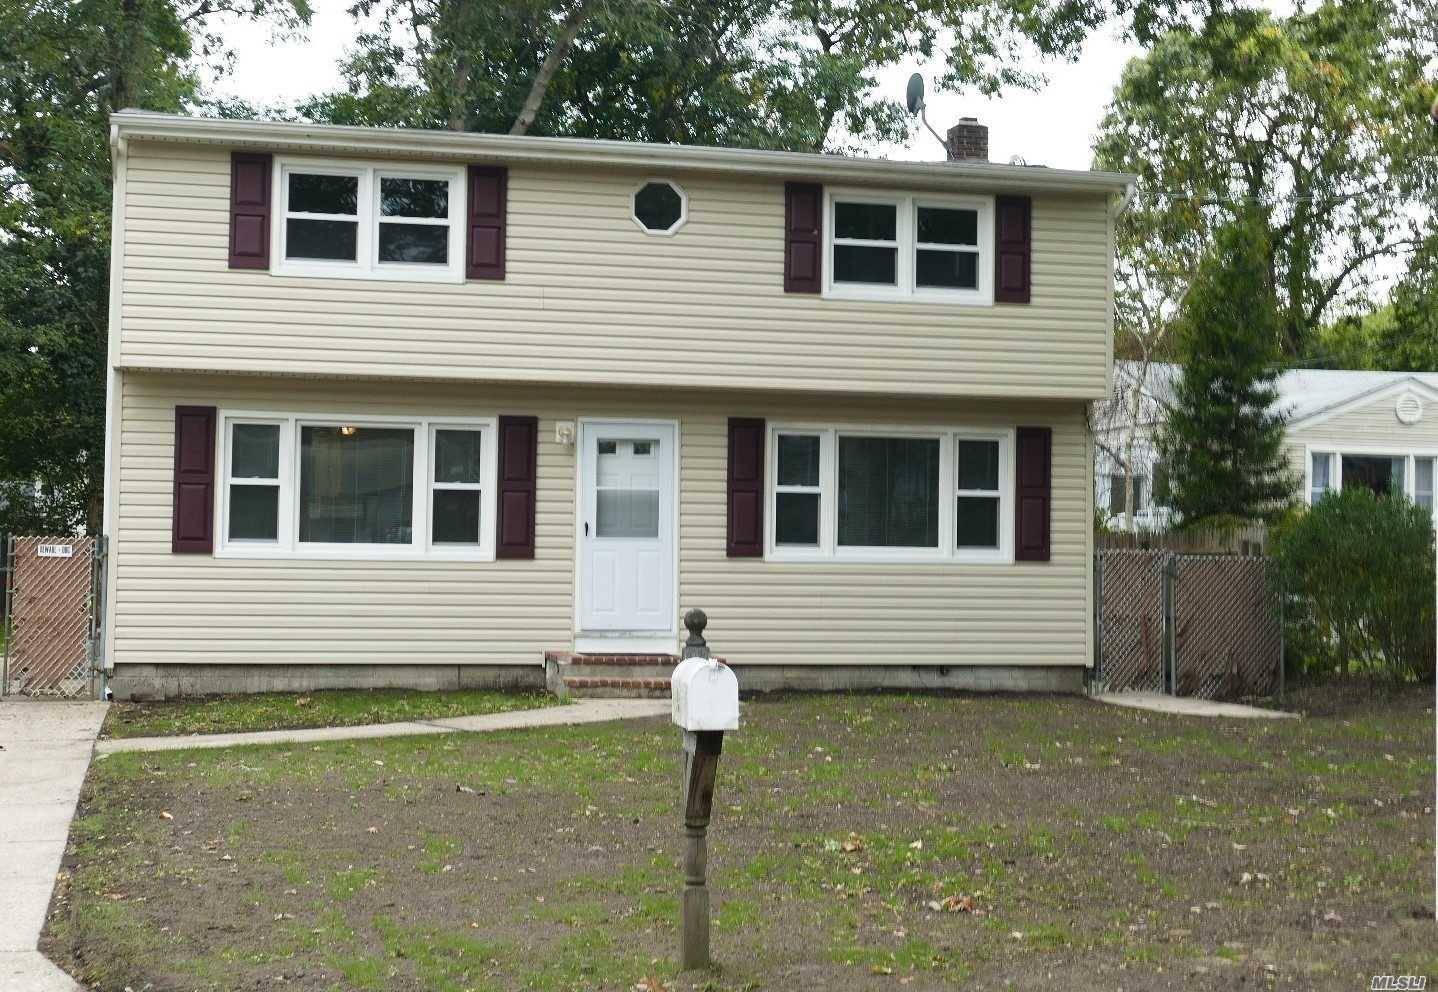 Welcome Home To This Newly Renovated Expanded Cape, Featuring 4 Bedrooms, Including Lg Master amp ; 2 Full Bths, New Eat In Kitchen, New Hardwood Floors throughout, Siding amp ; ...